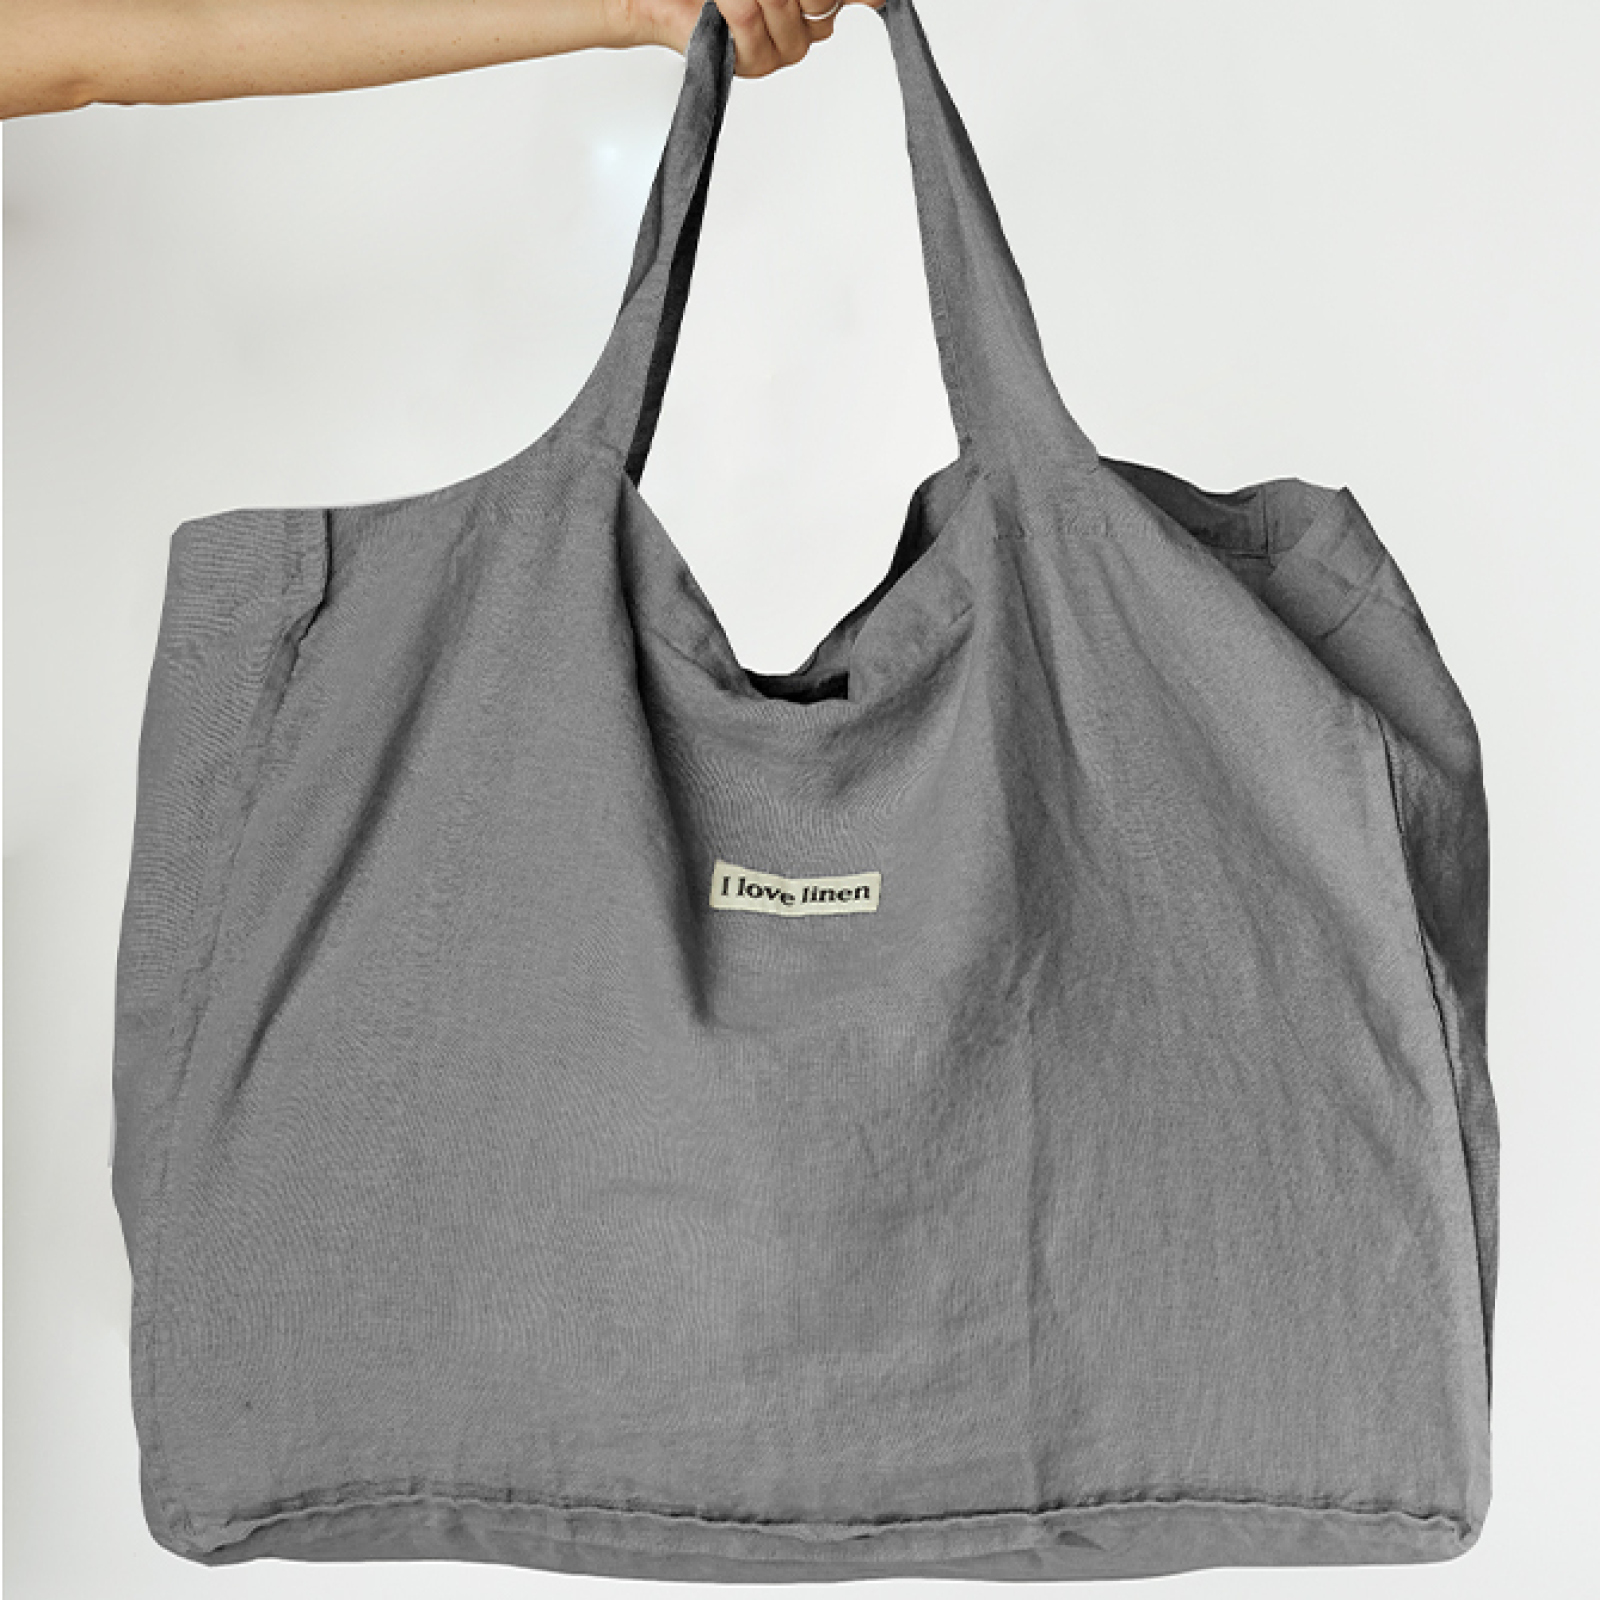 French Linen Carry All Bag in Warm Grey